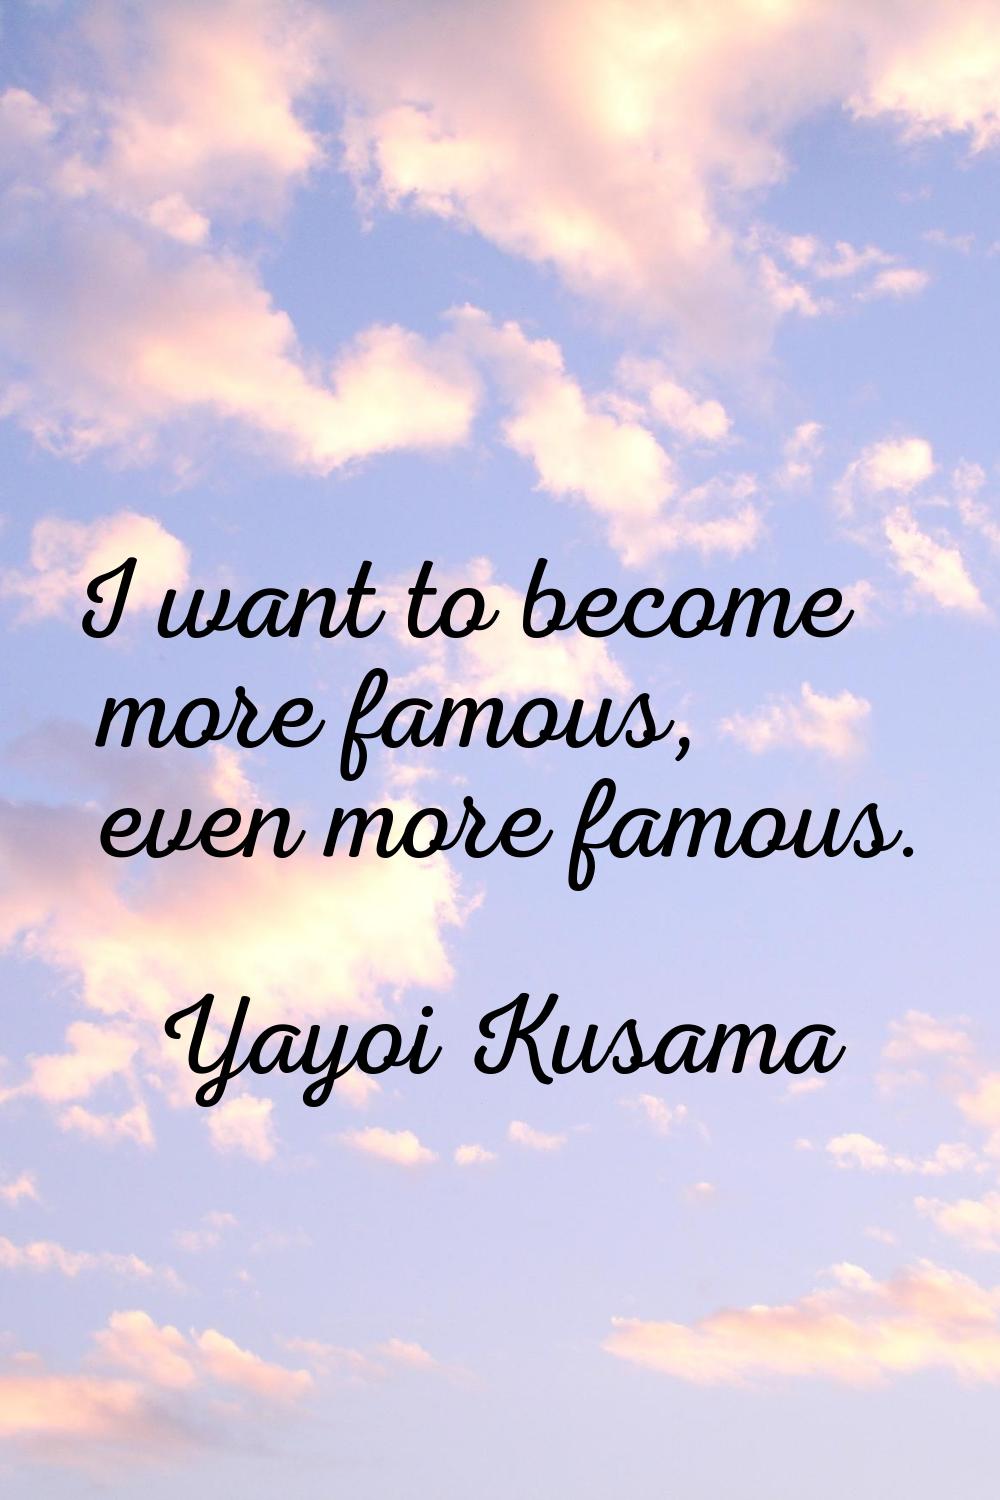 I want to become more famous, even more famous.